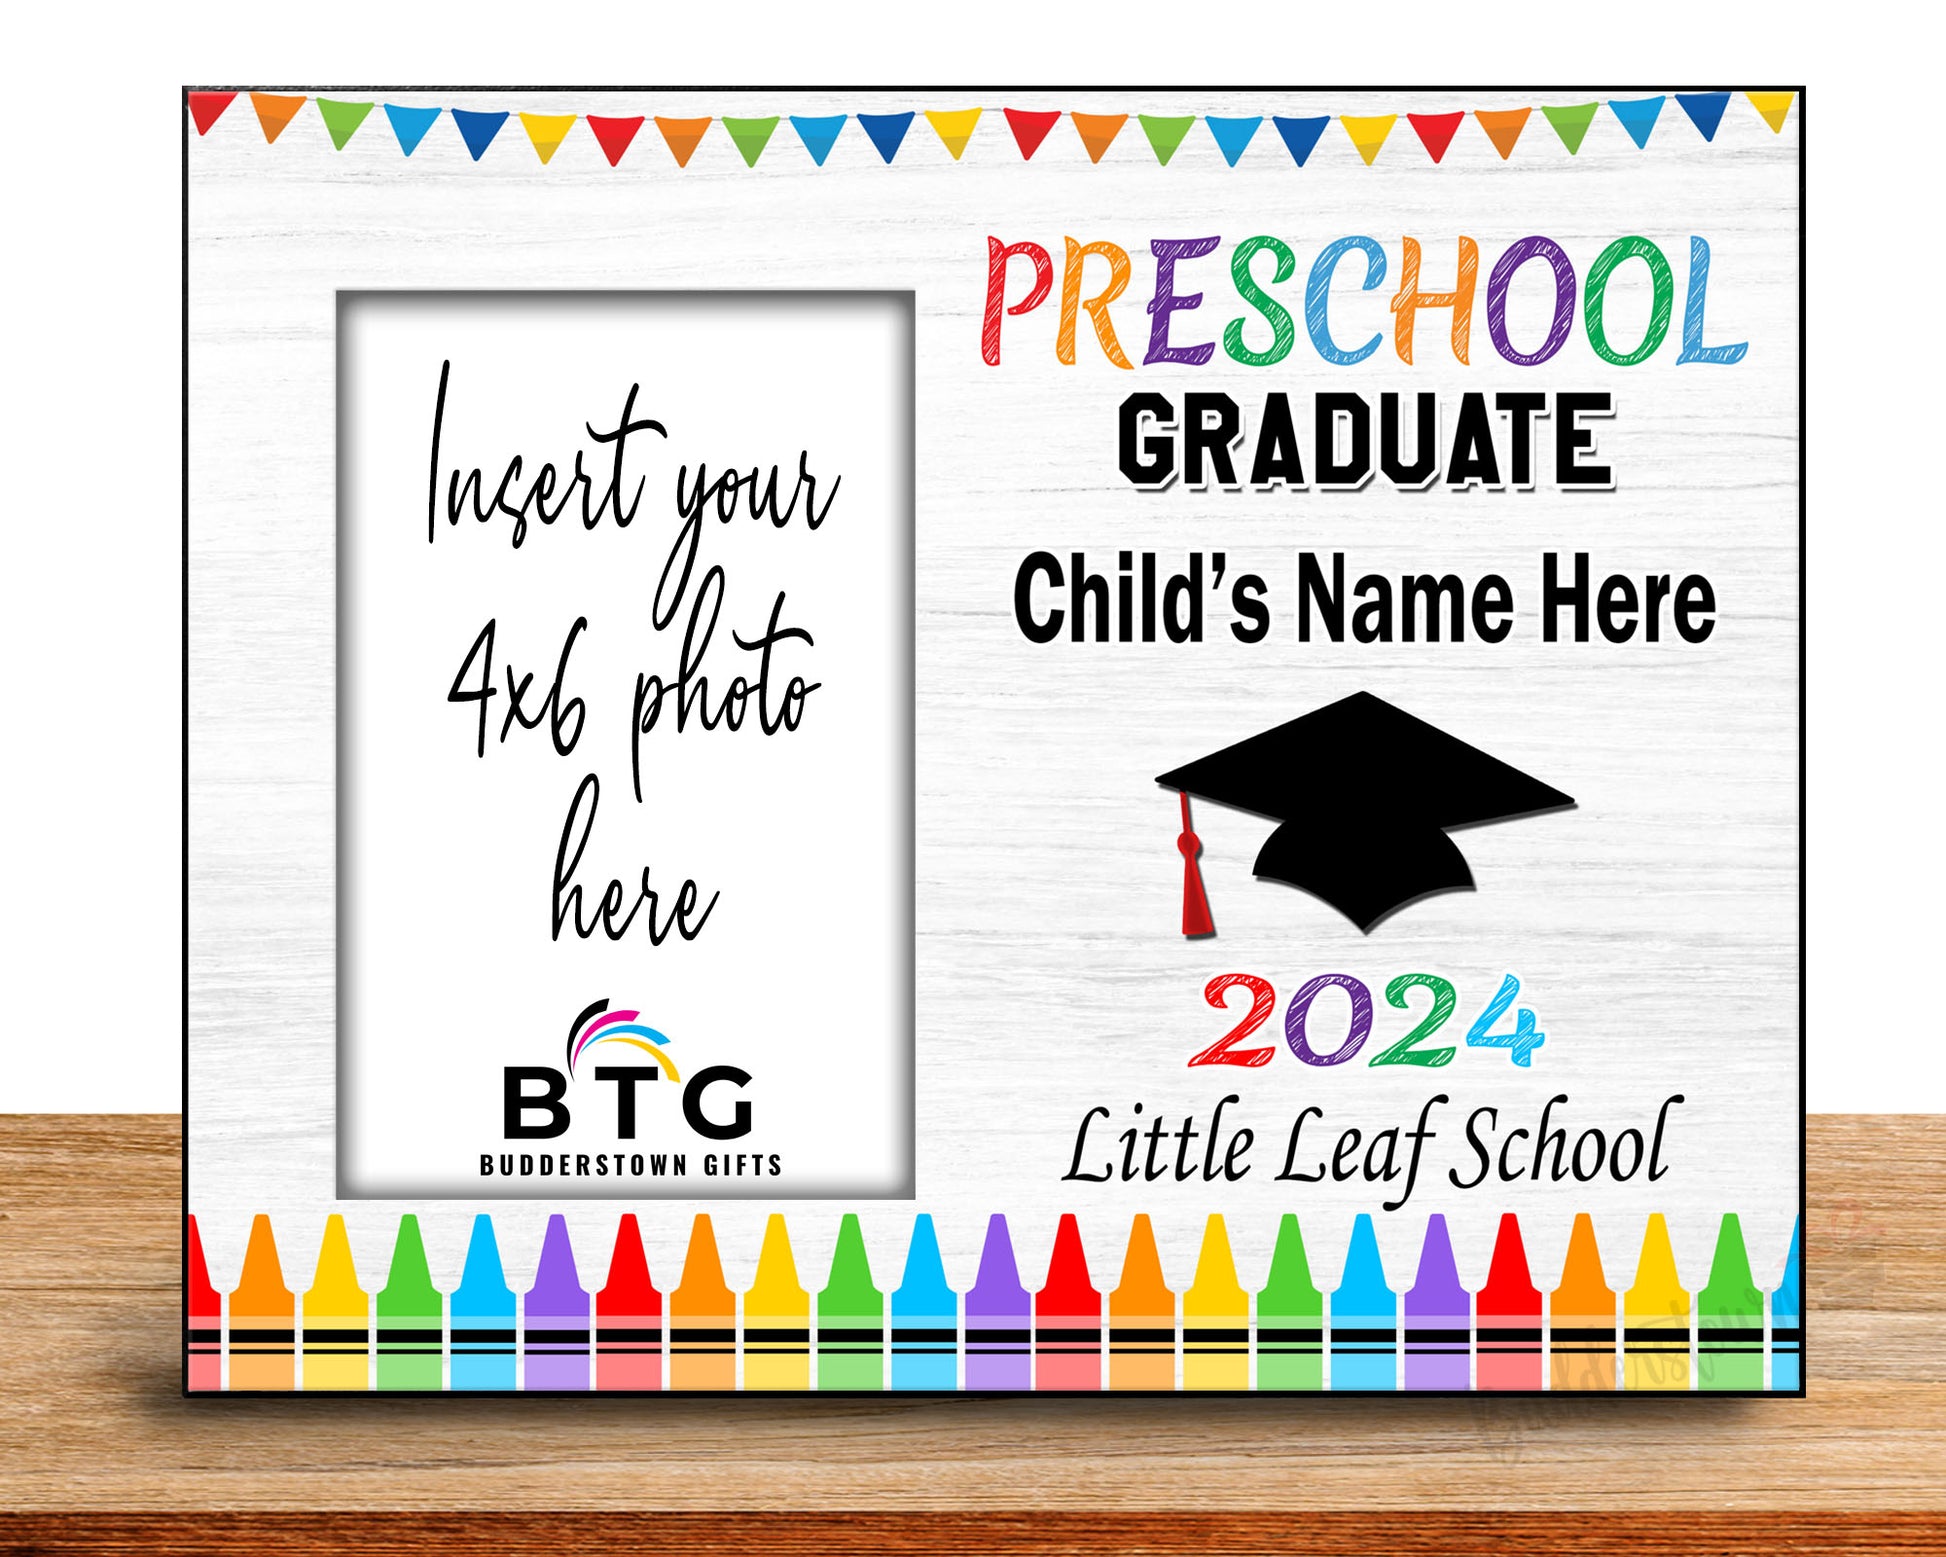 Preschool Graduate Personalized Graduation Frame.

This heartfelt 8x10 wood Photo Frame is the perfect way to commemorate this significant milestone. It holds an actual 4x6 photo, allowing you to capture your little one's adorable smile on their big day.